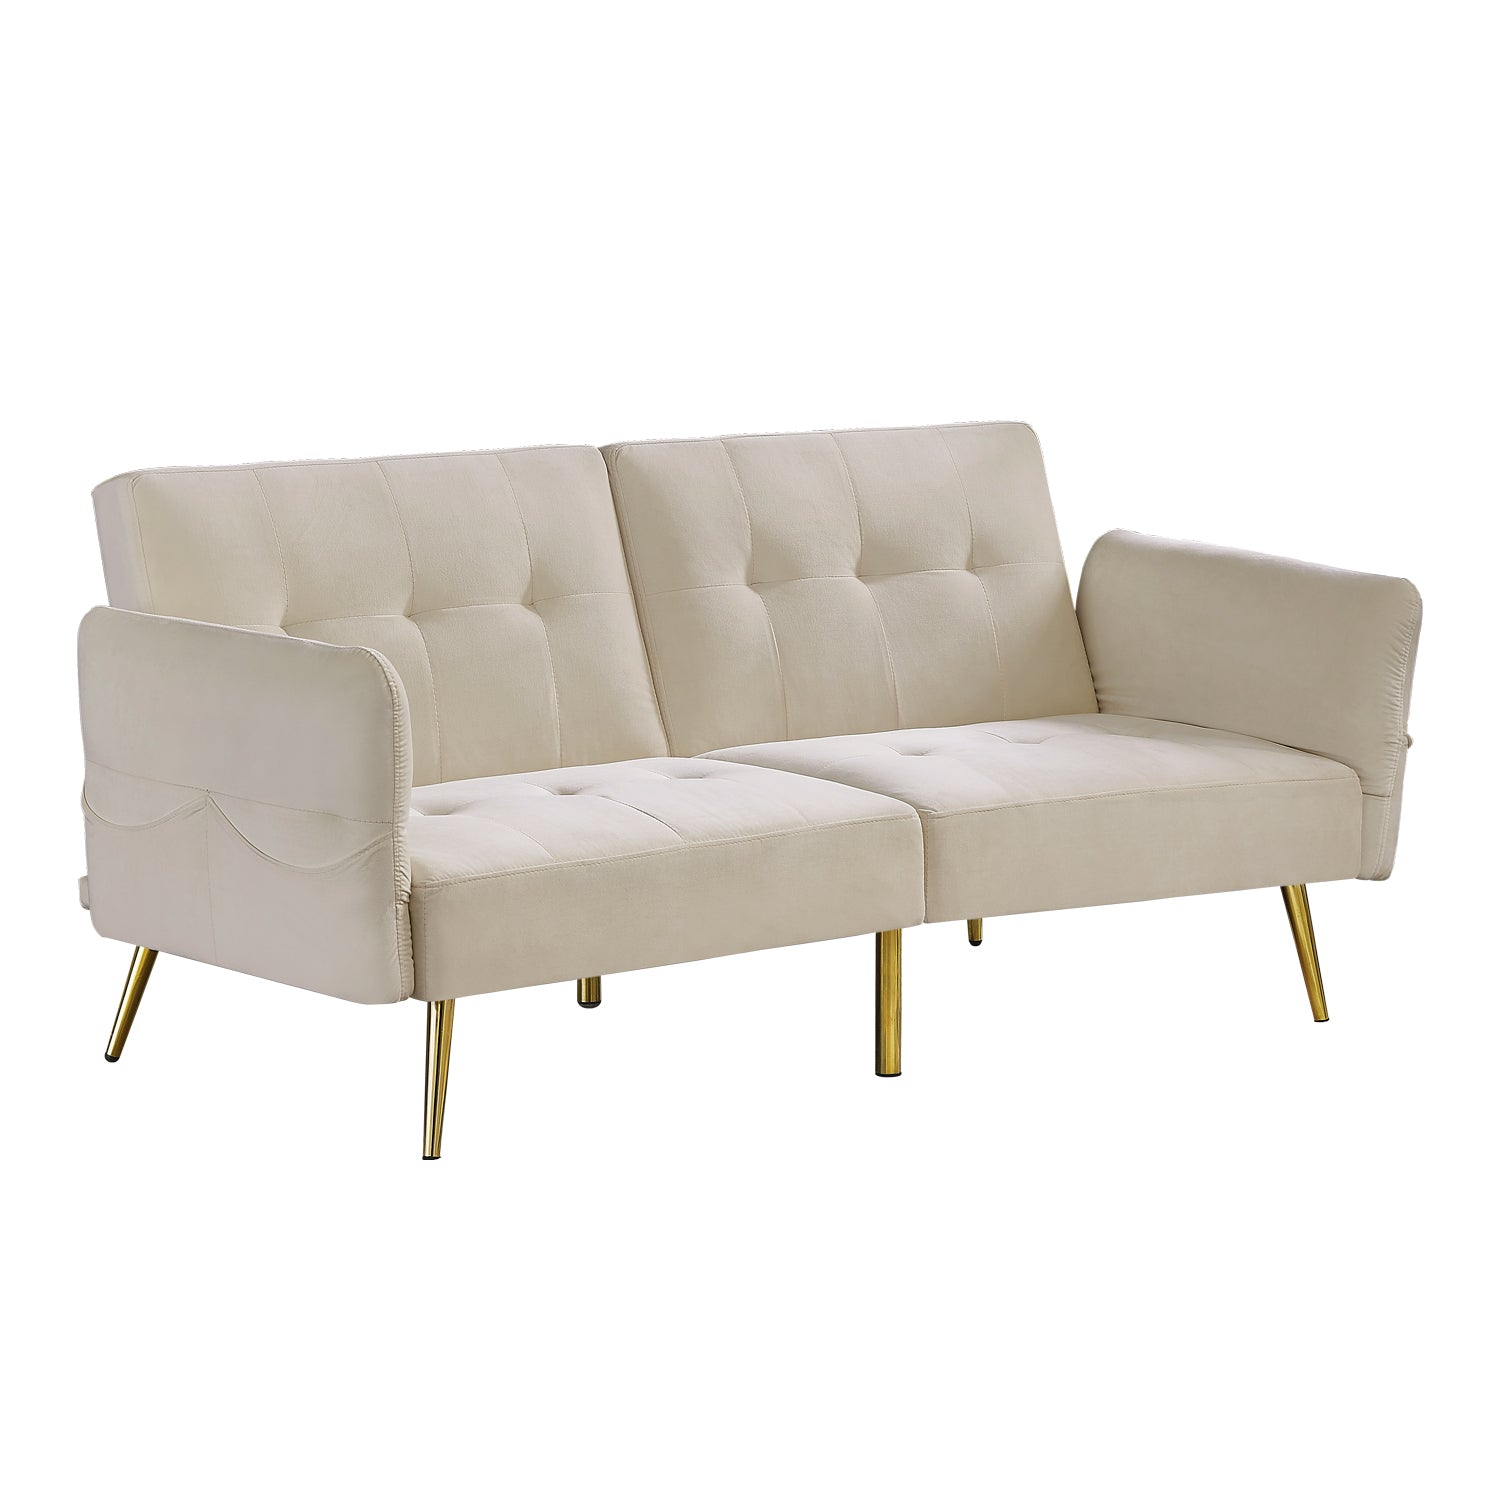 78" Velvet Futon Sofa Bed, Convertible Sleeper Loveseat Couch with Folded Armrests and Storage Bags, Beige